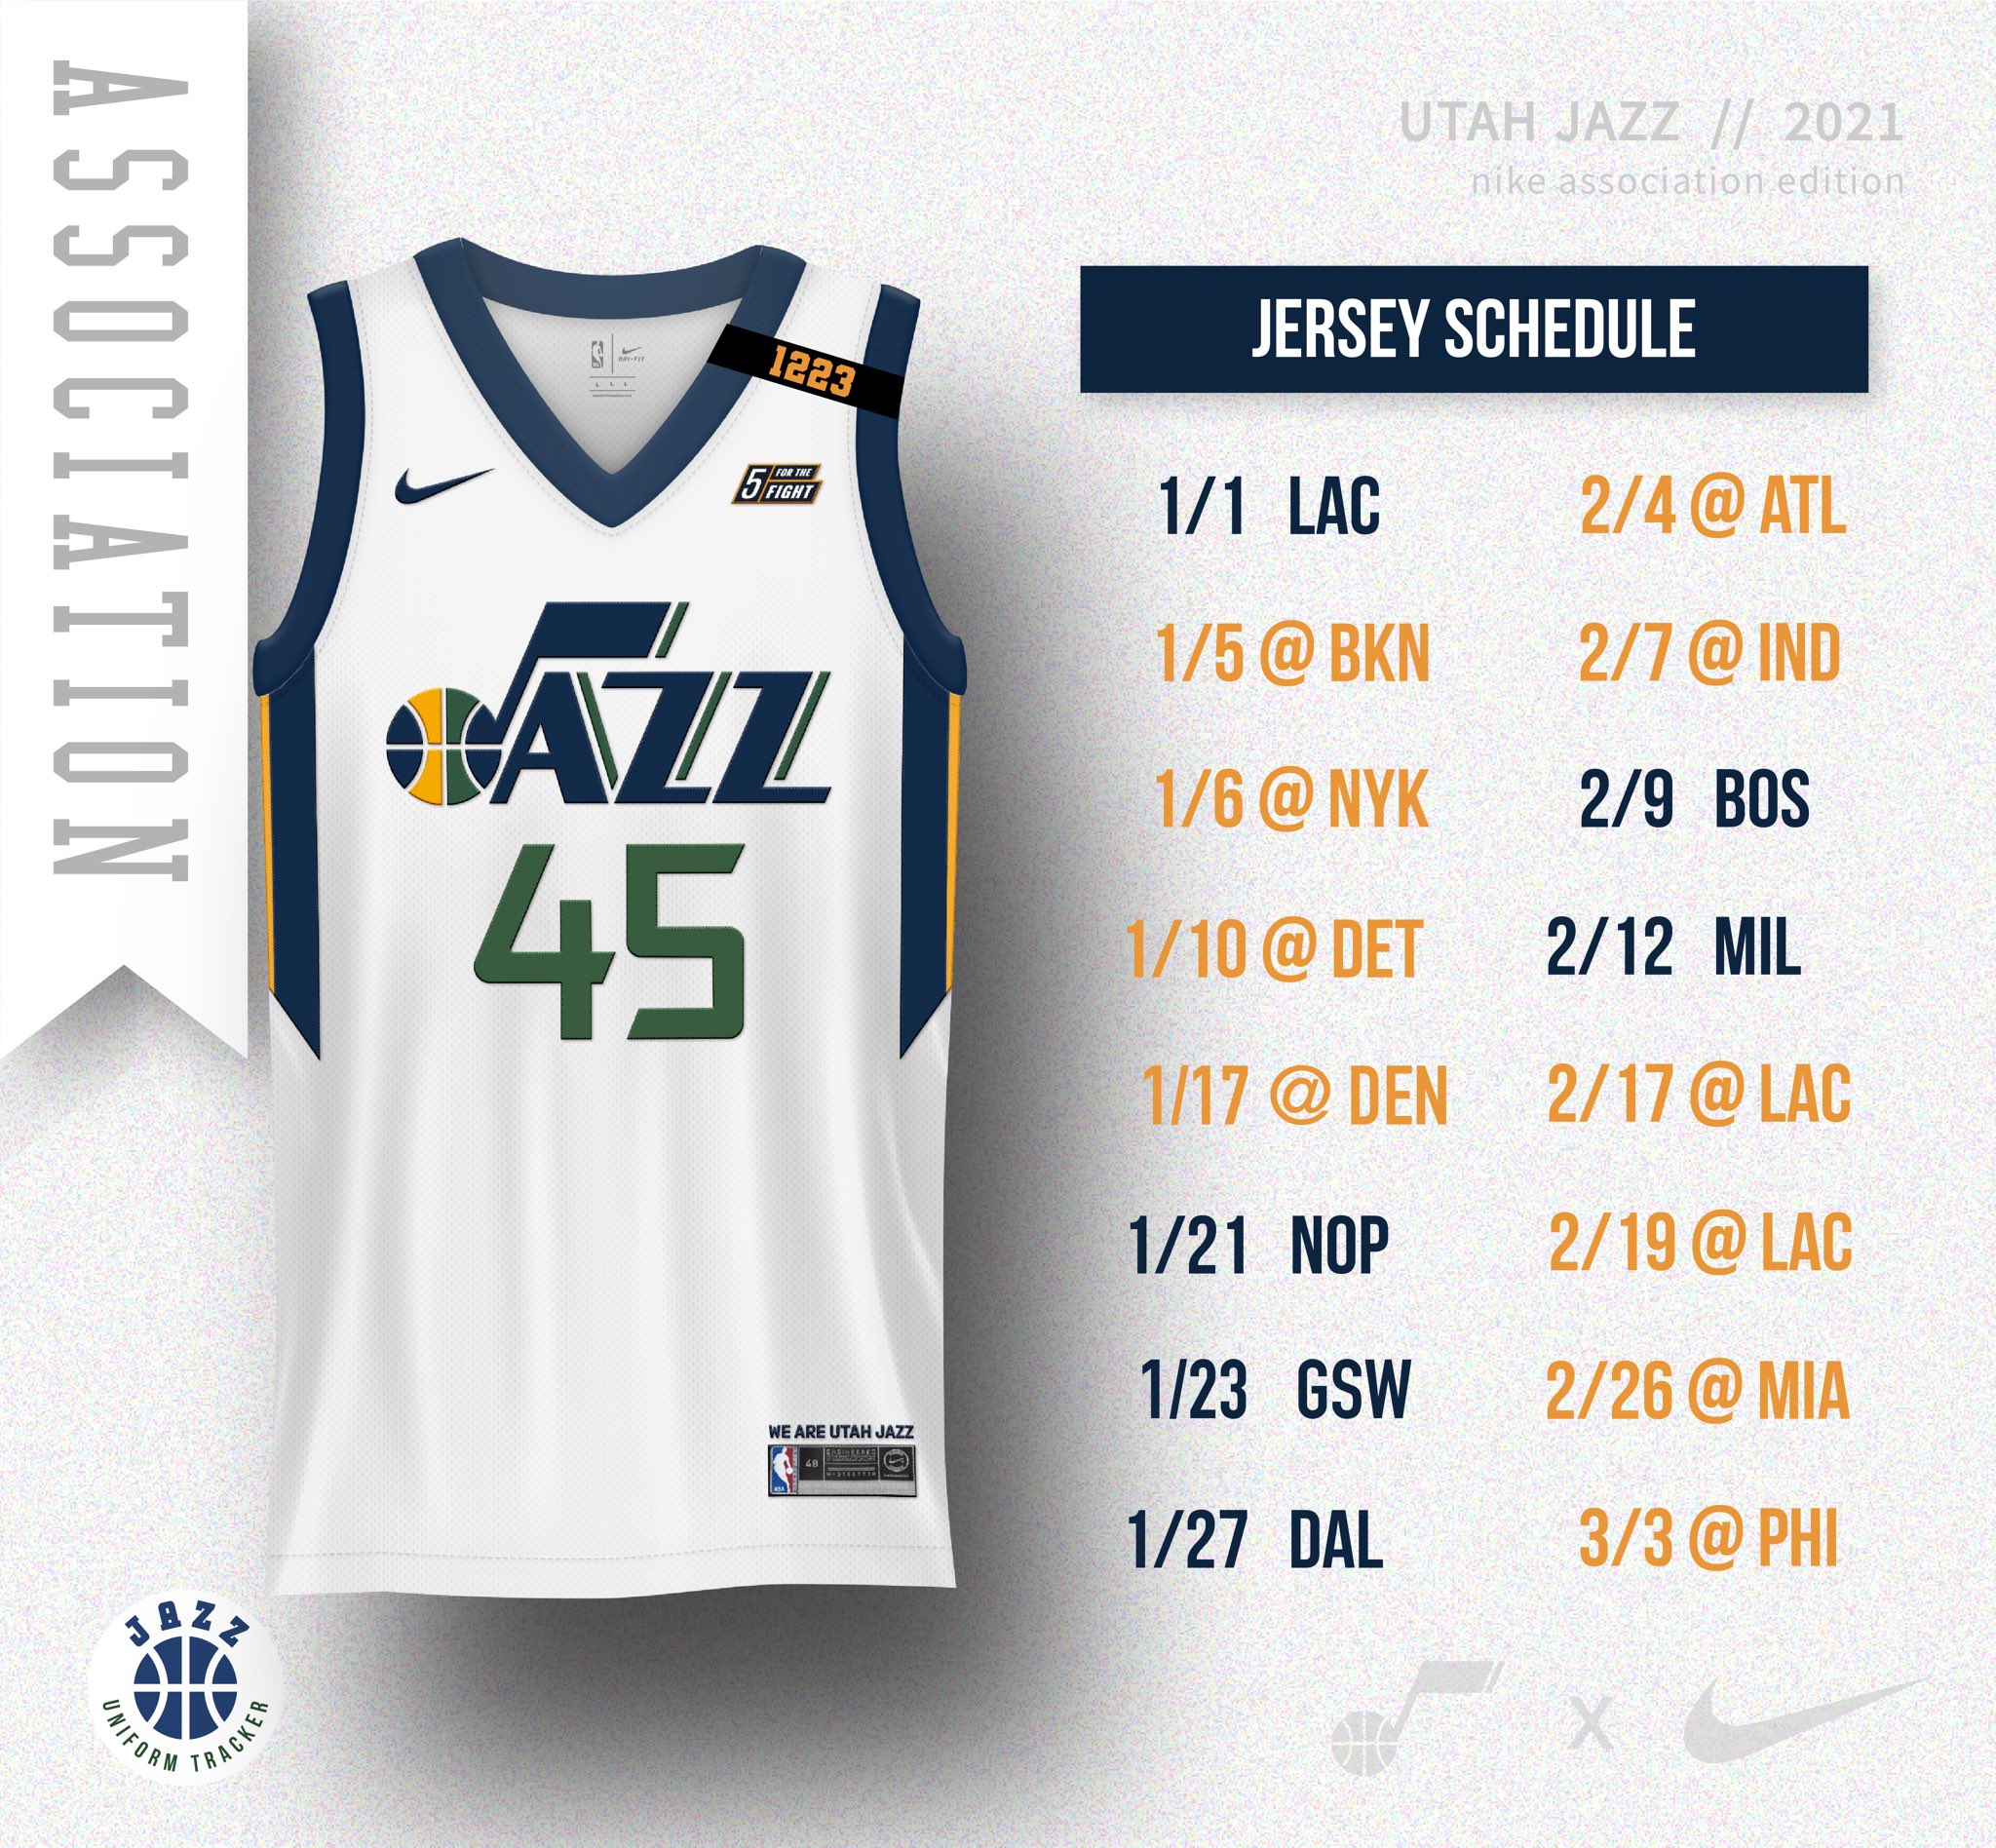 Jazz Uniform Tracker on X: Breaking: The Jazz have released their